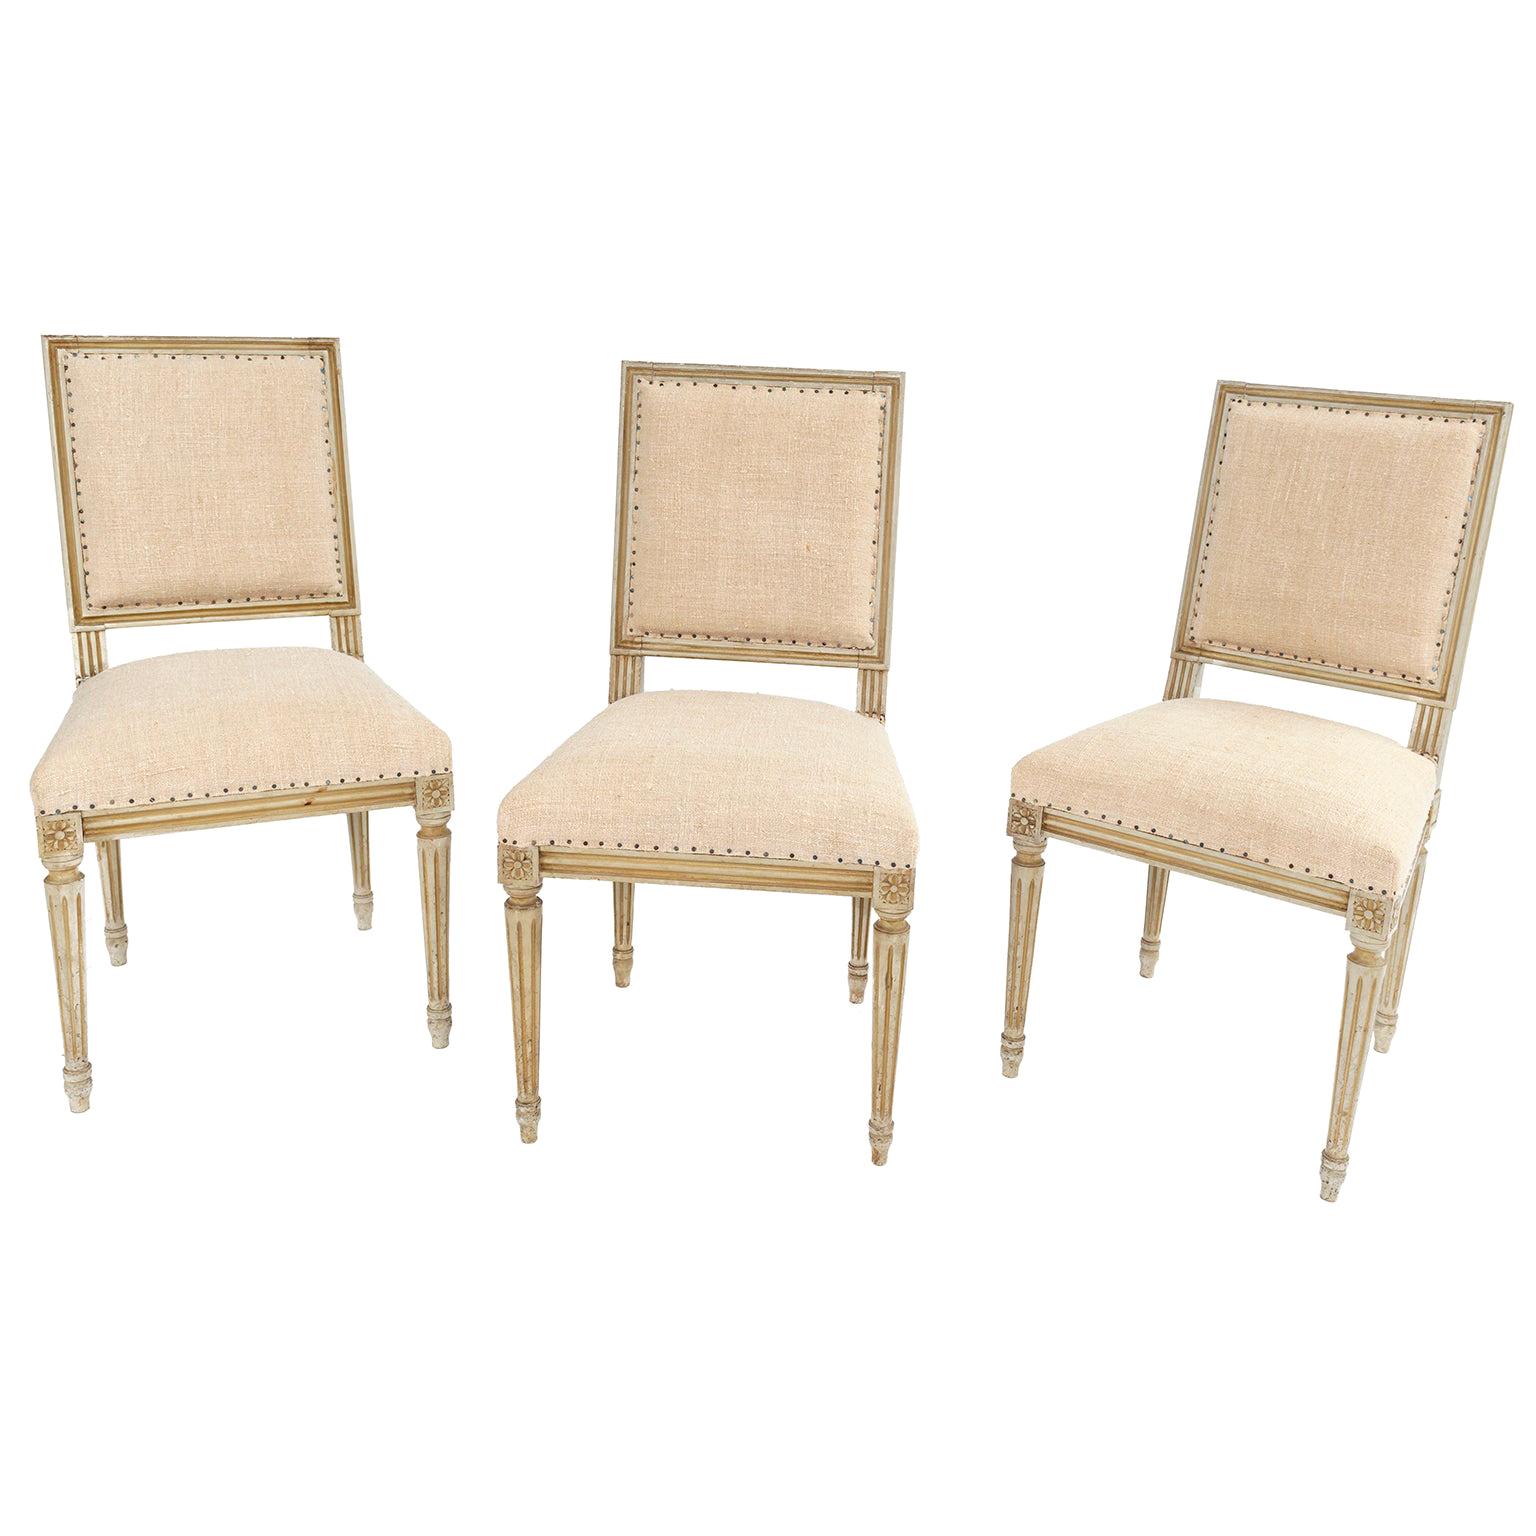 Set of Six Louis XVI Style Square Back Dining Chairs Star Rosettes